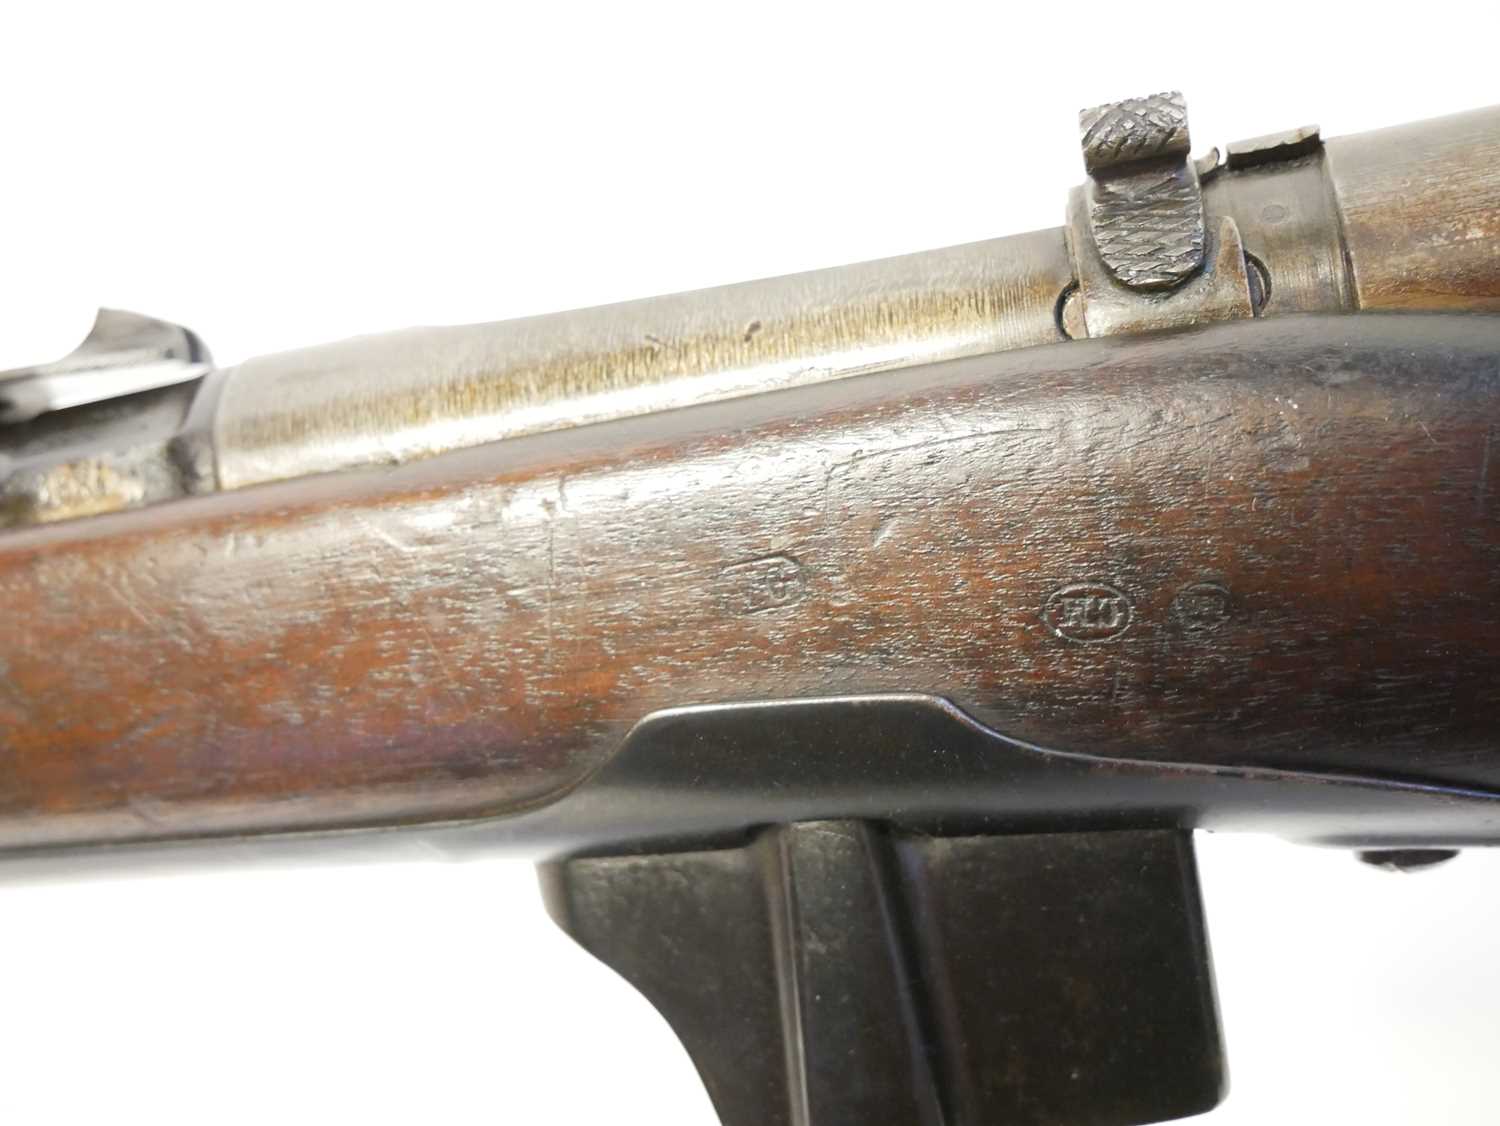 Italian Vetterli M.1870/87 10.35x47R bolt action rifle, serial number 5778, 33.5inch barrel fitted - Image 13 of 17